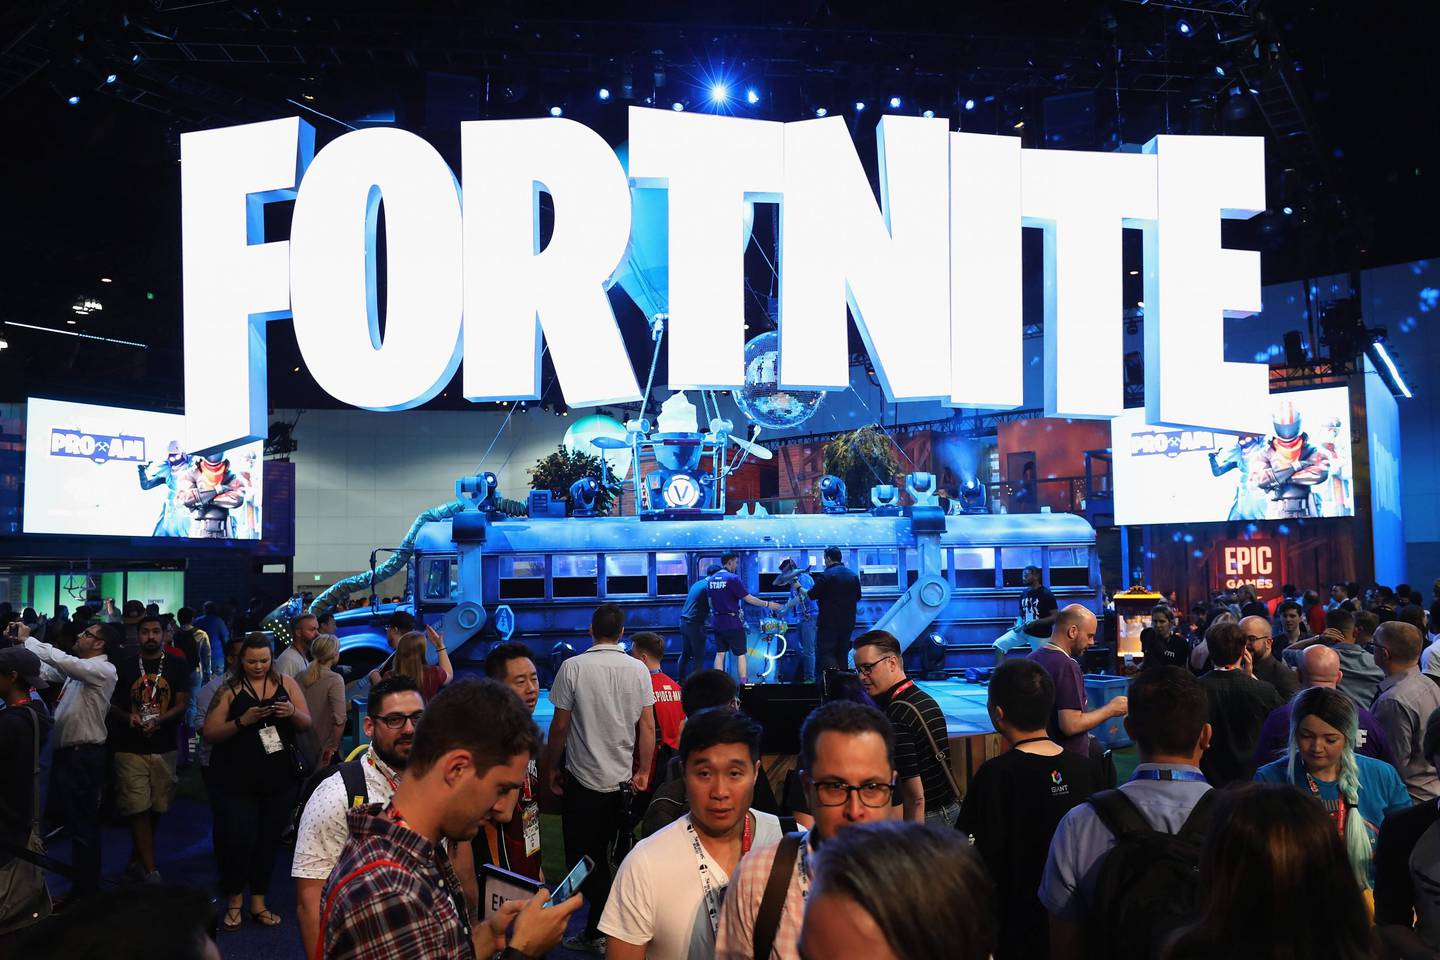 E3 is no longer going: the cancellation of the historic gamer event was confirmed